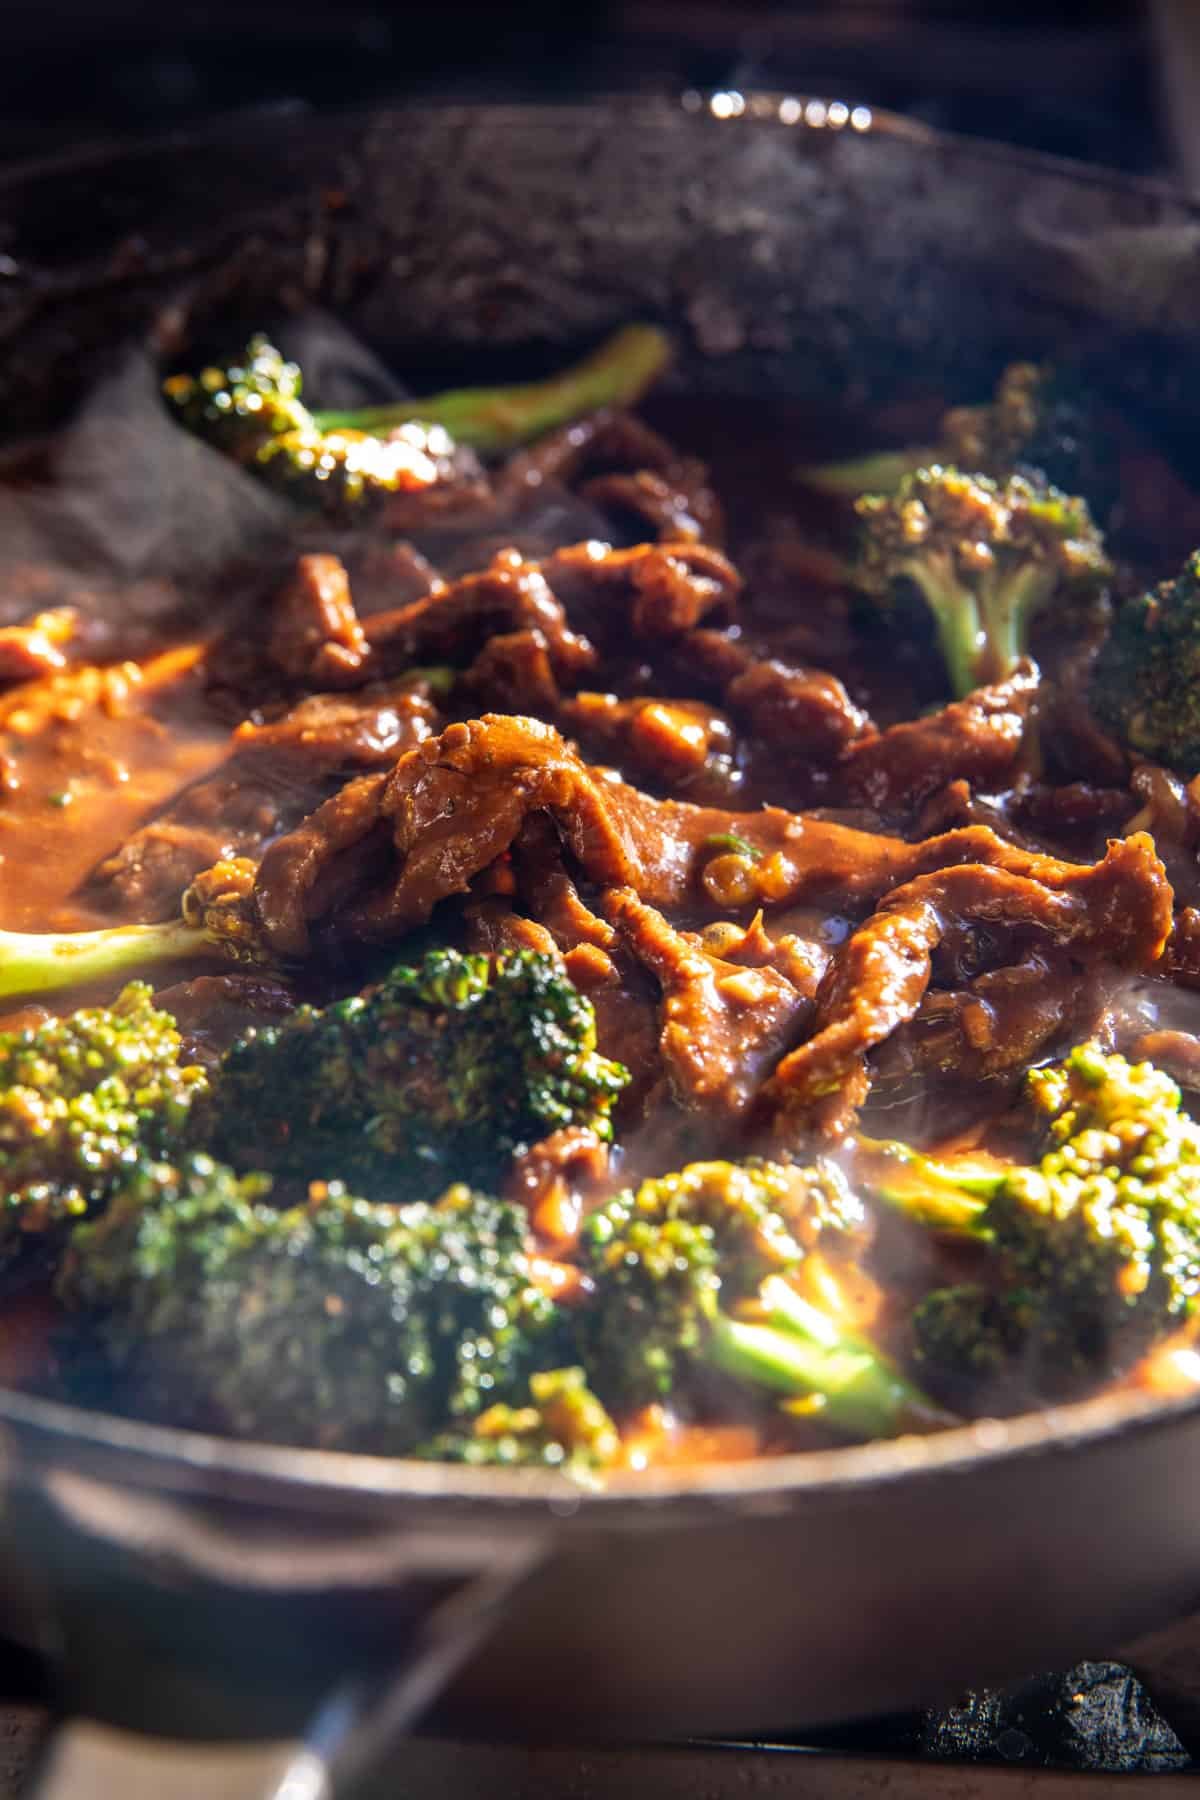 20 Minute Miso Ginger Beef and Broccoli | halfbakedharvest.com